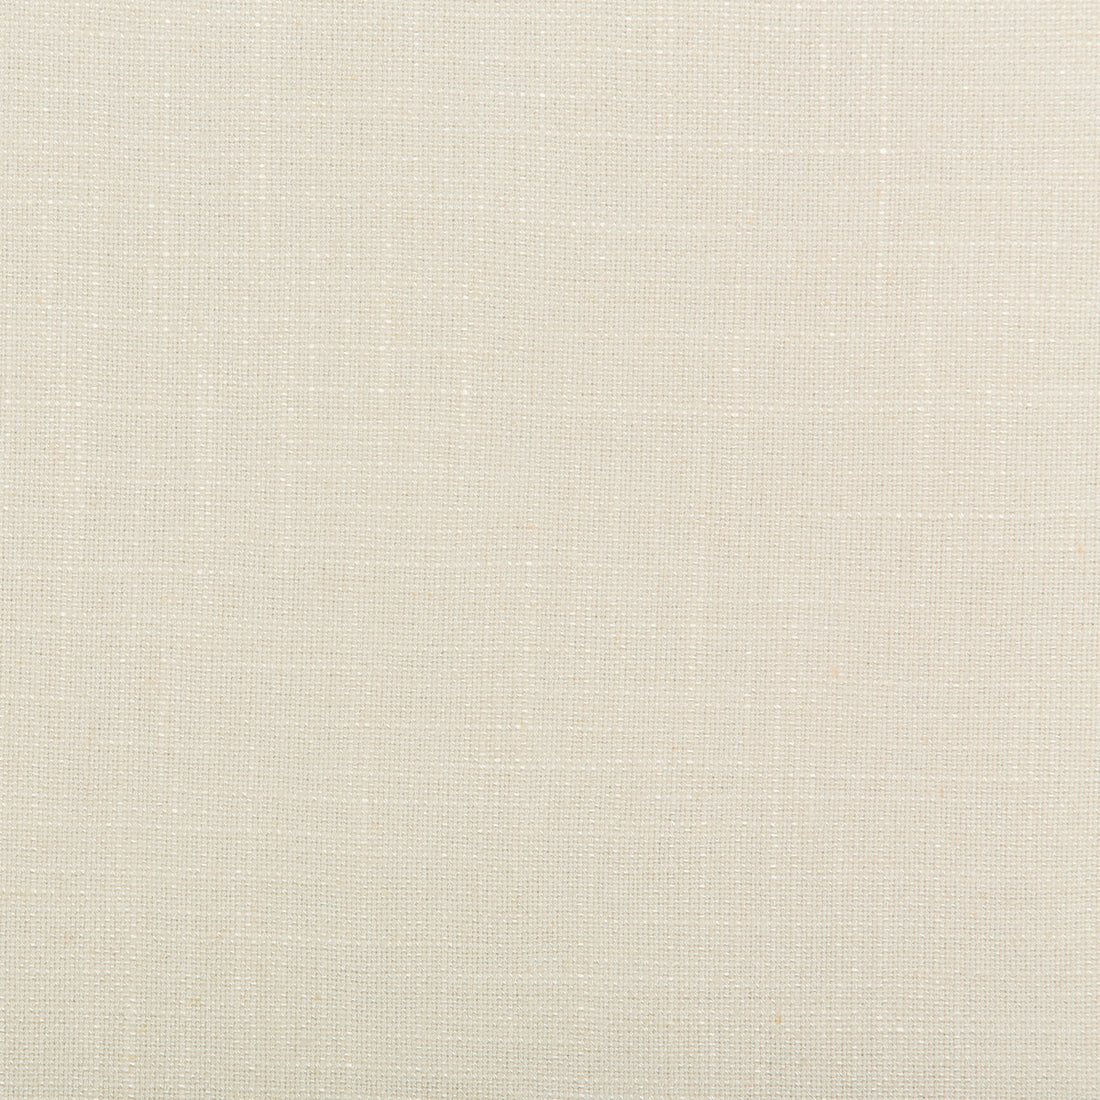 Aura fabric in pearl color - pattern 35520.1.0 - by Kravet Design